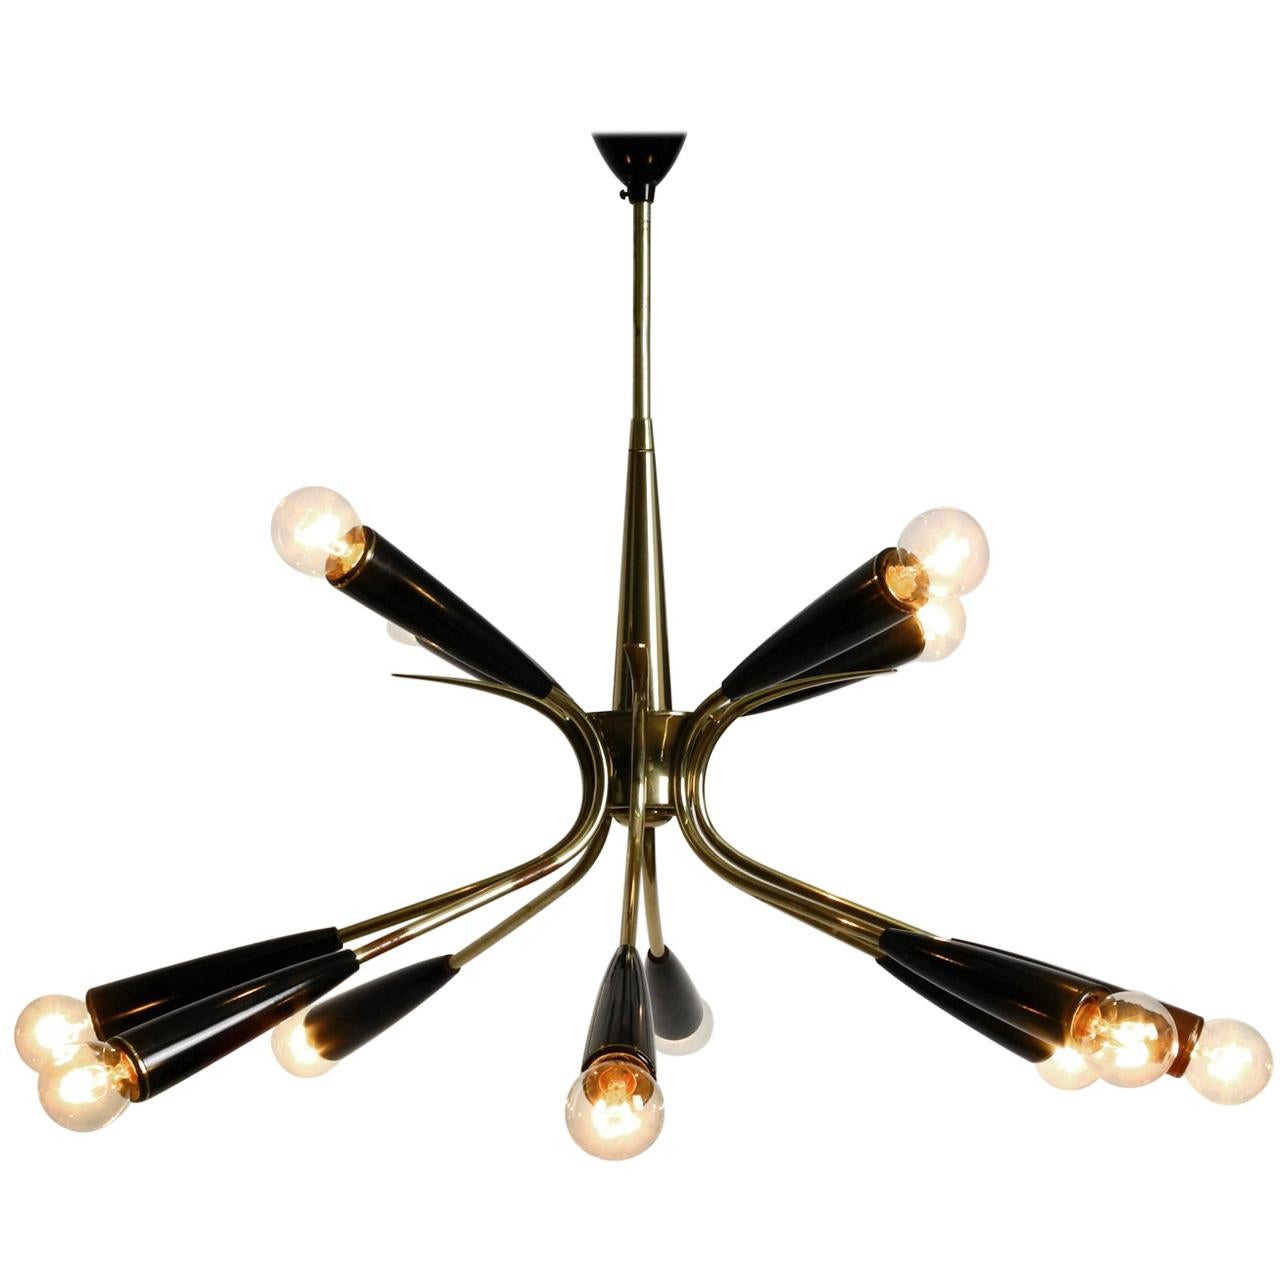 Midcentury 12 Armed Sputnik Brass Ceiling Lamp with Cones Made of Bakalite